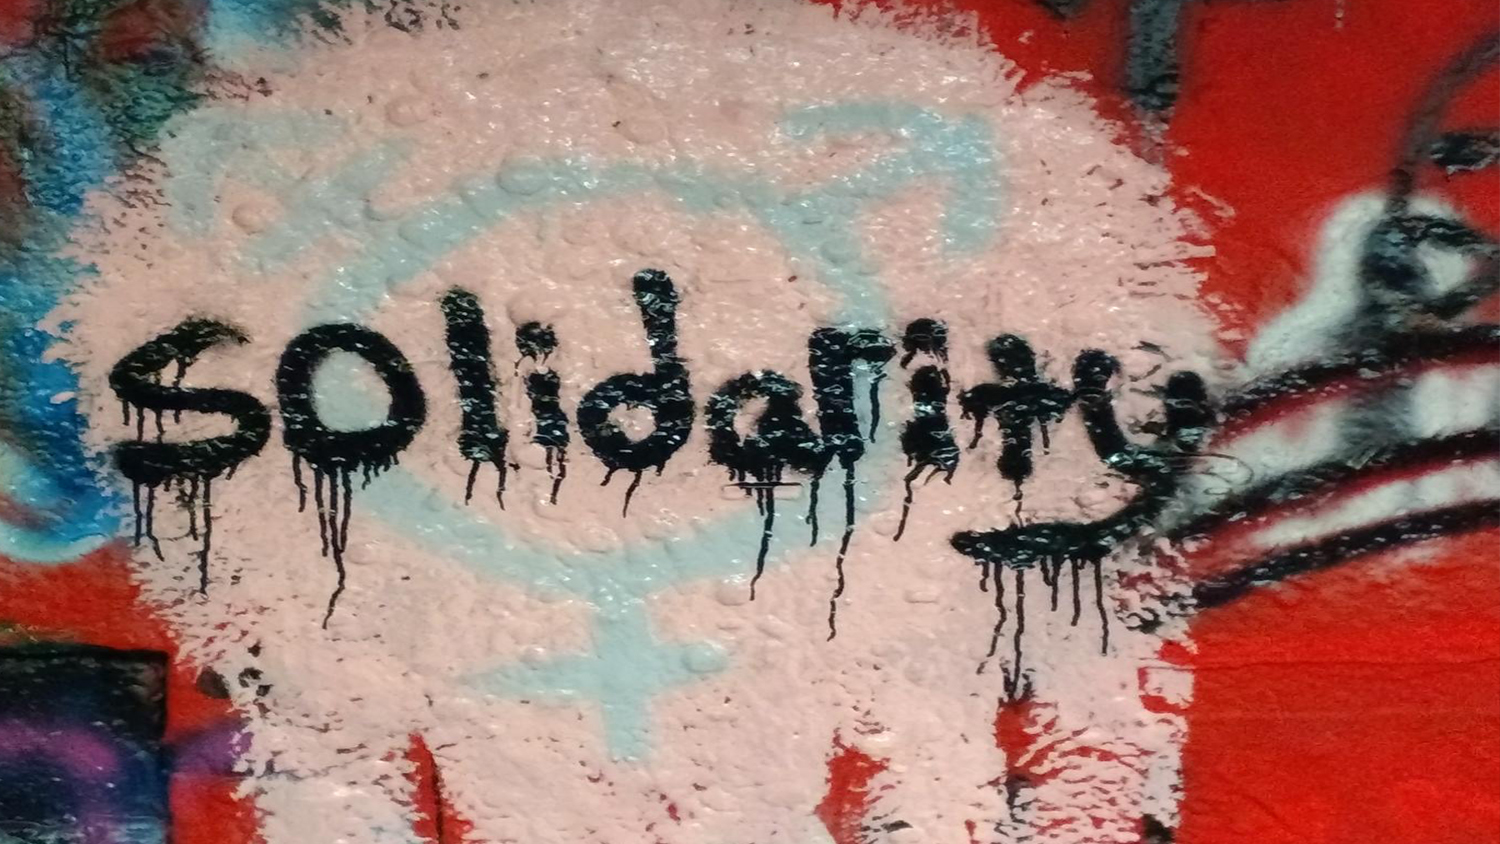 The word "Solidarity" in spray paint in the Free Expression Tunnel